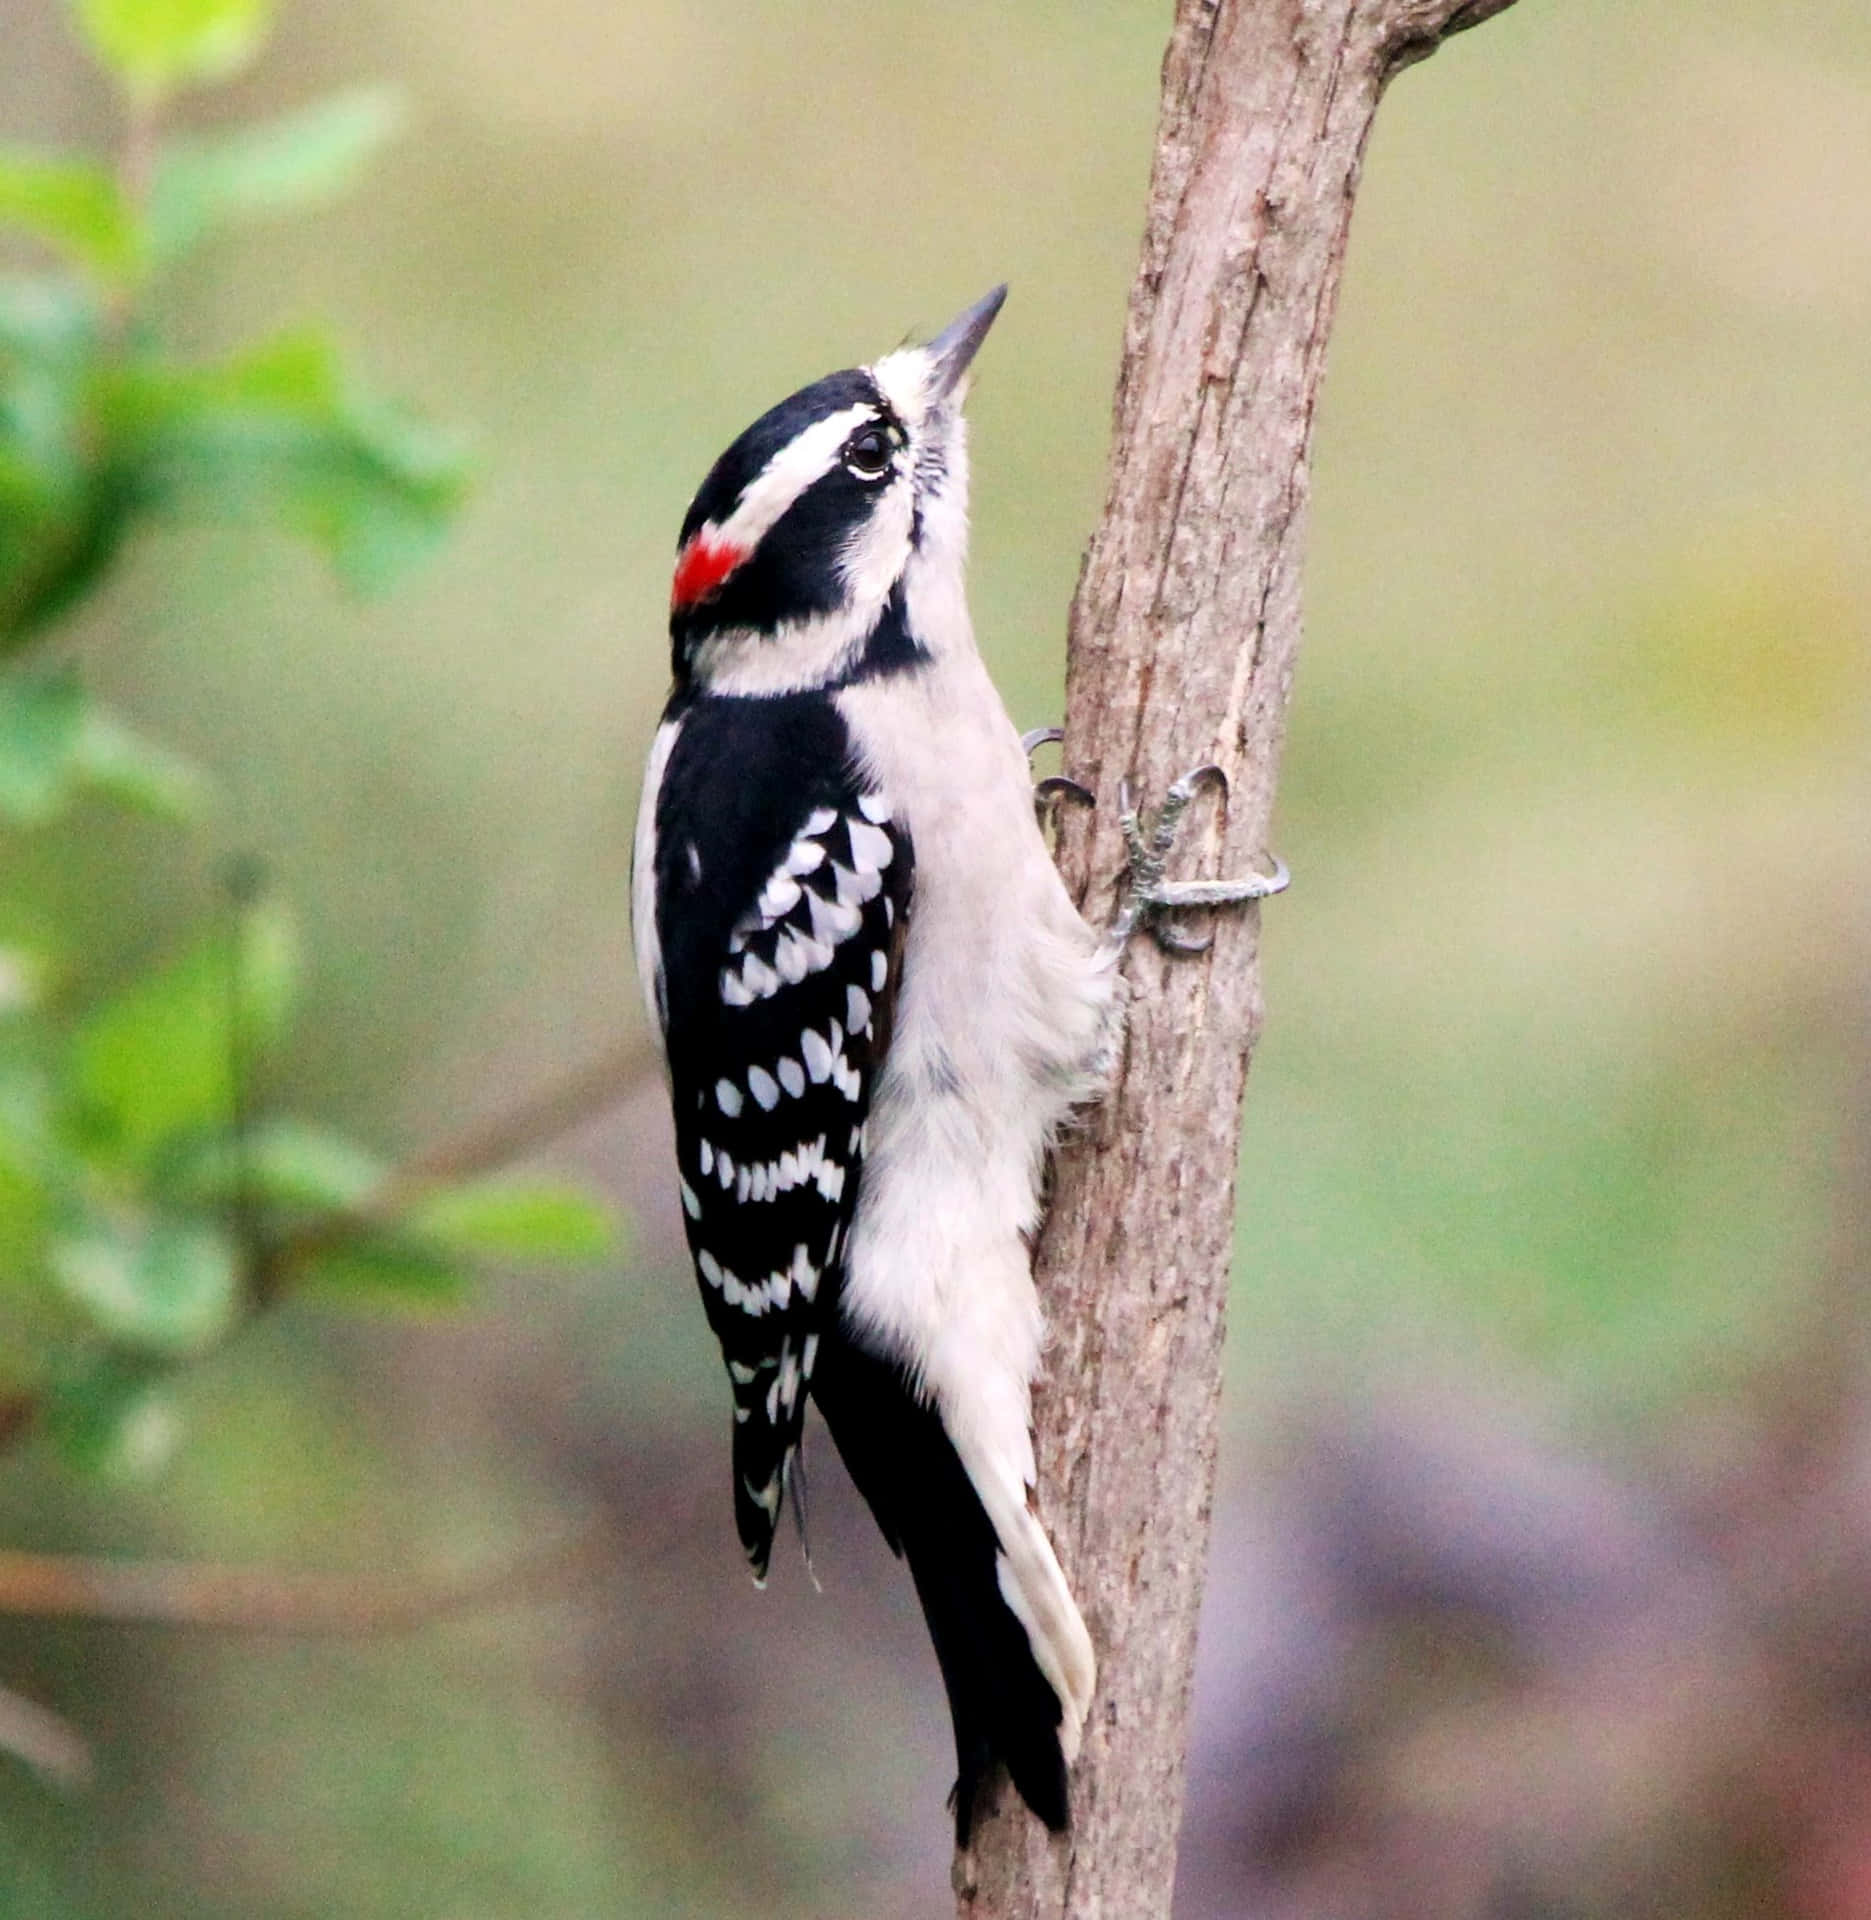 A woodpecker pauses to take in its surroundings